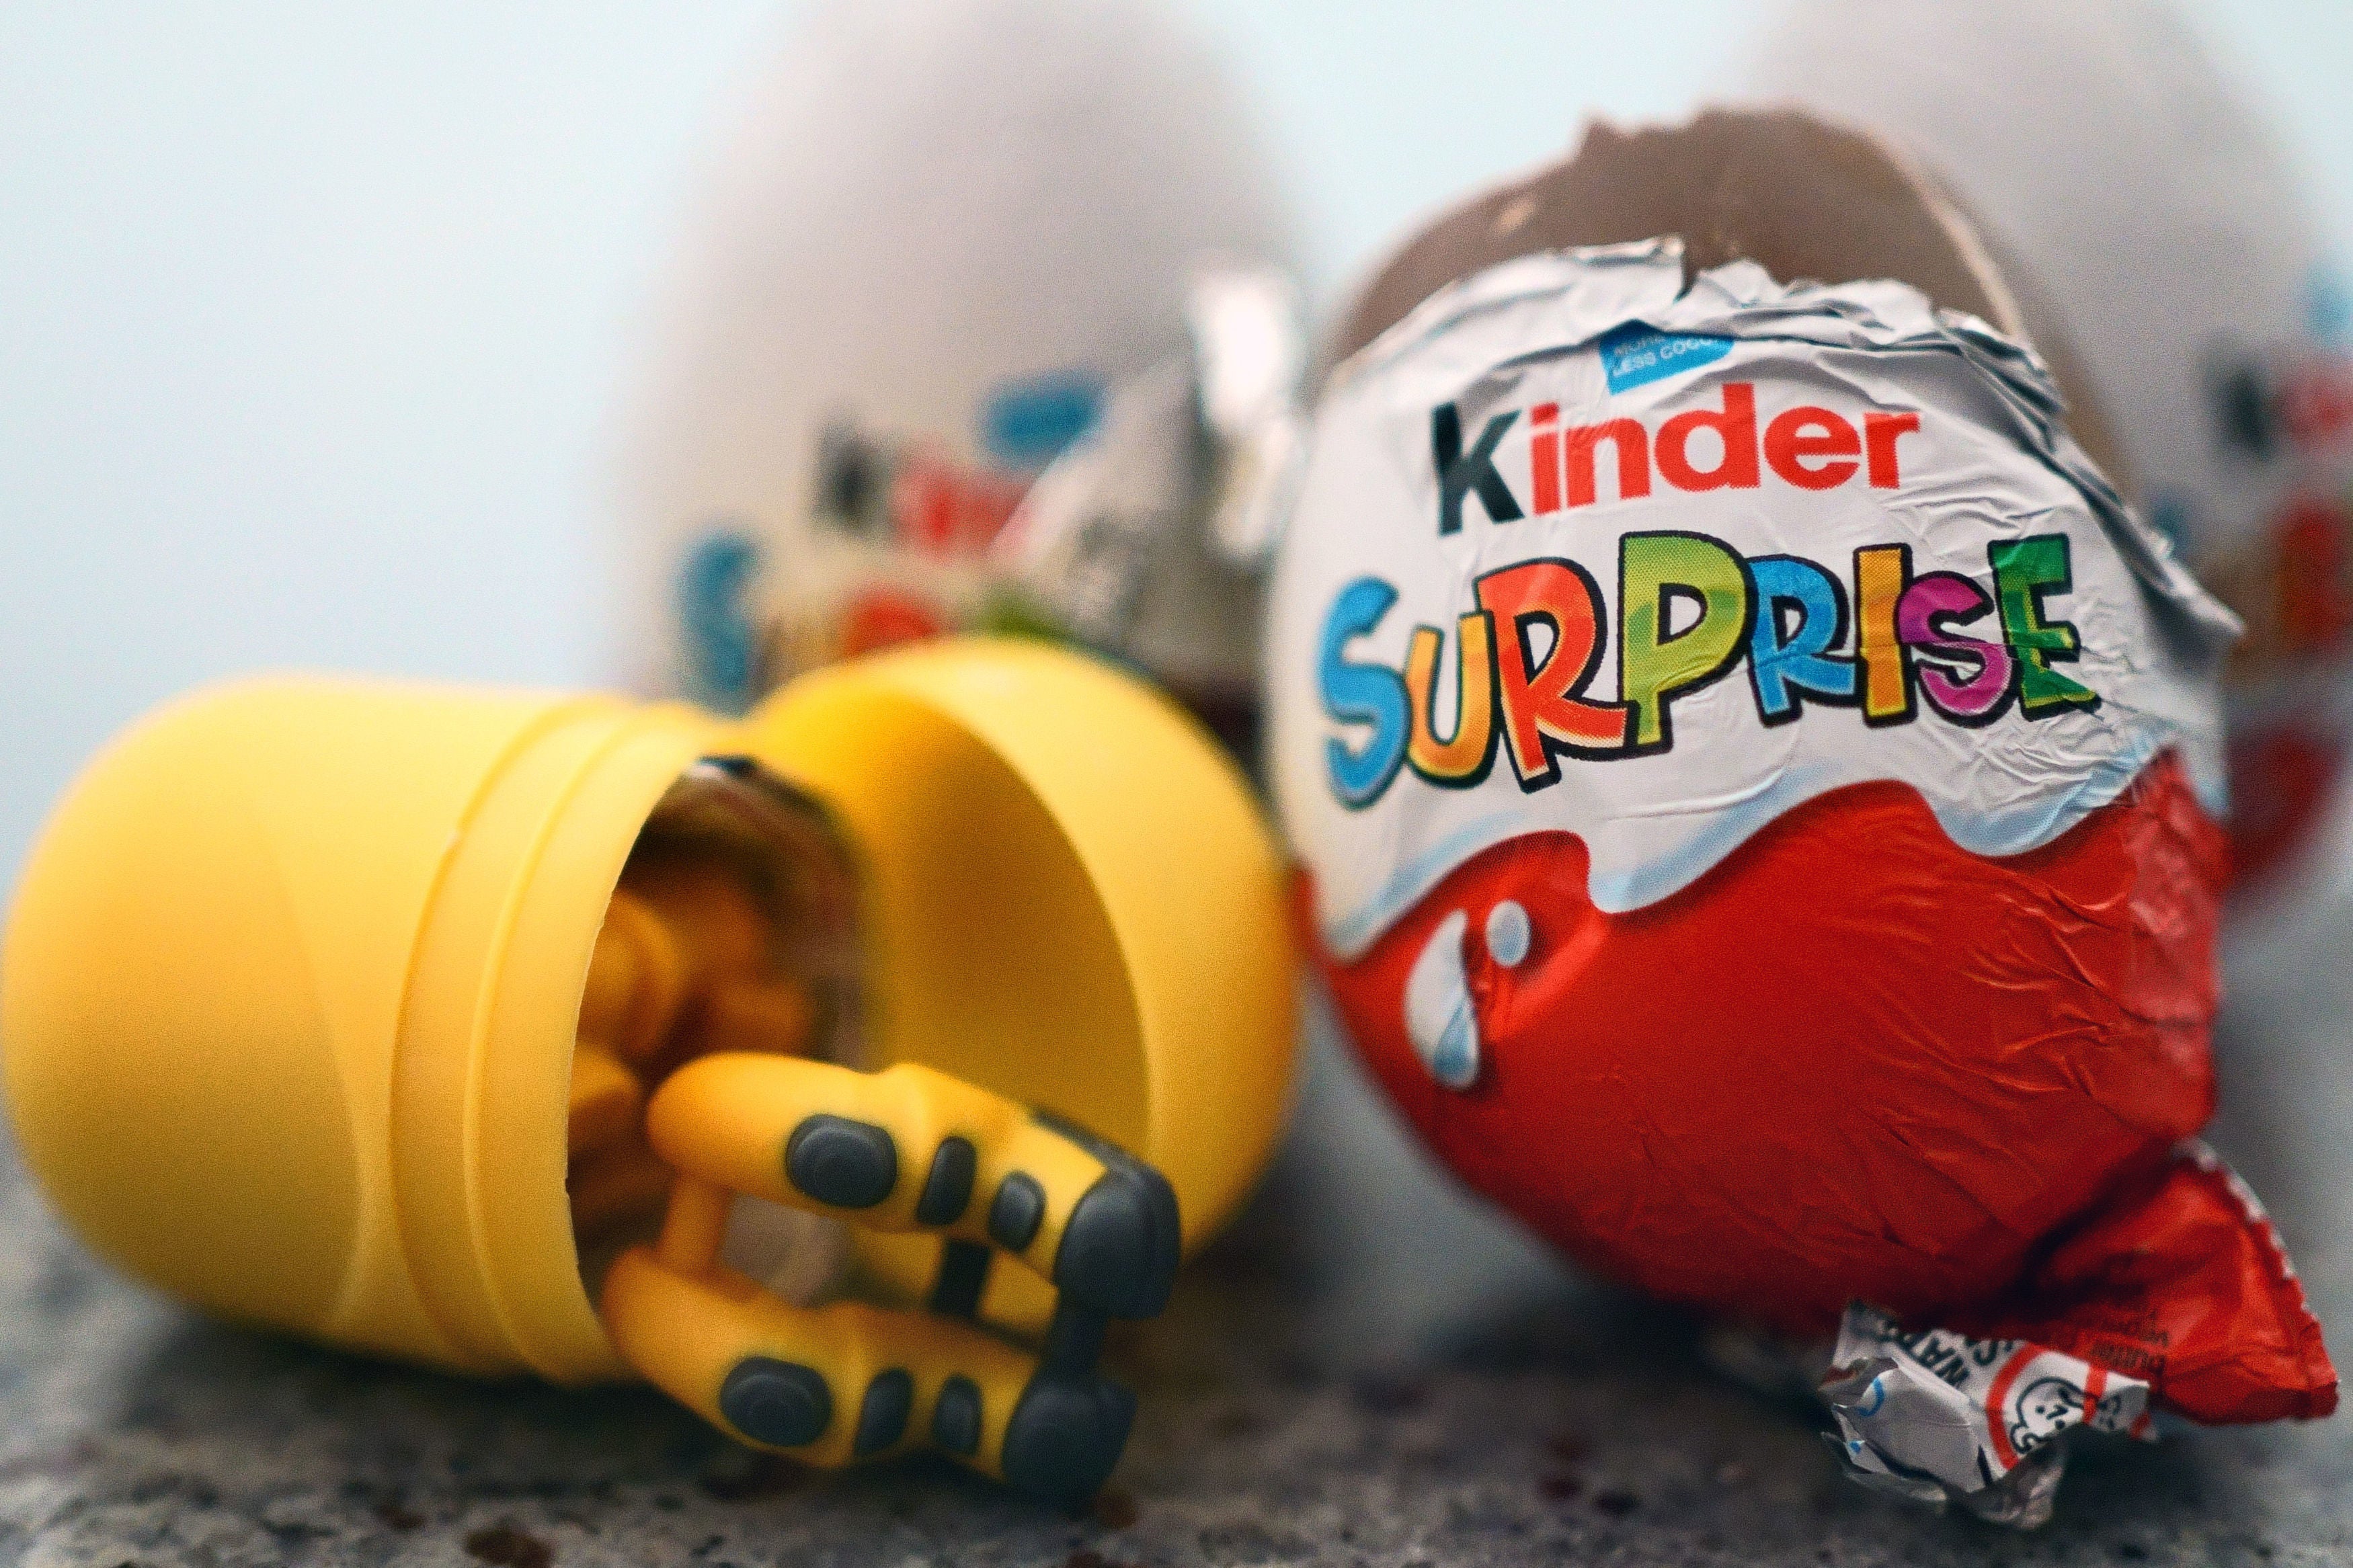 Kinder have had to recall certain products over salmonella fears